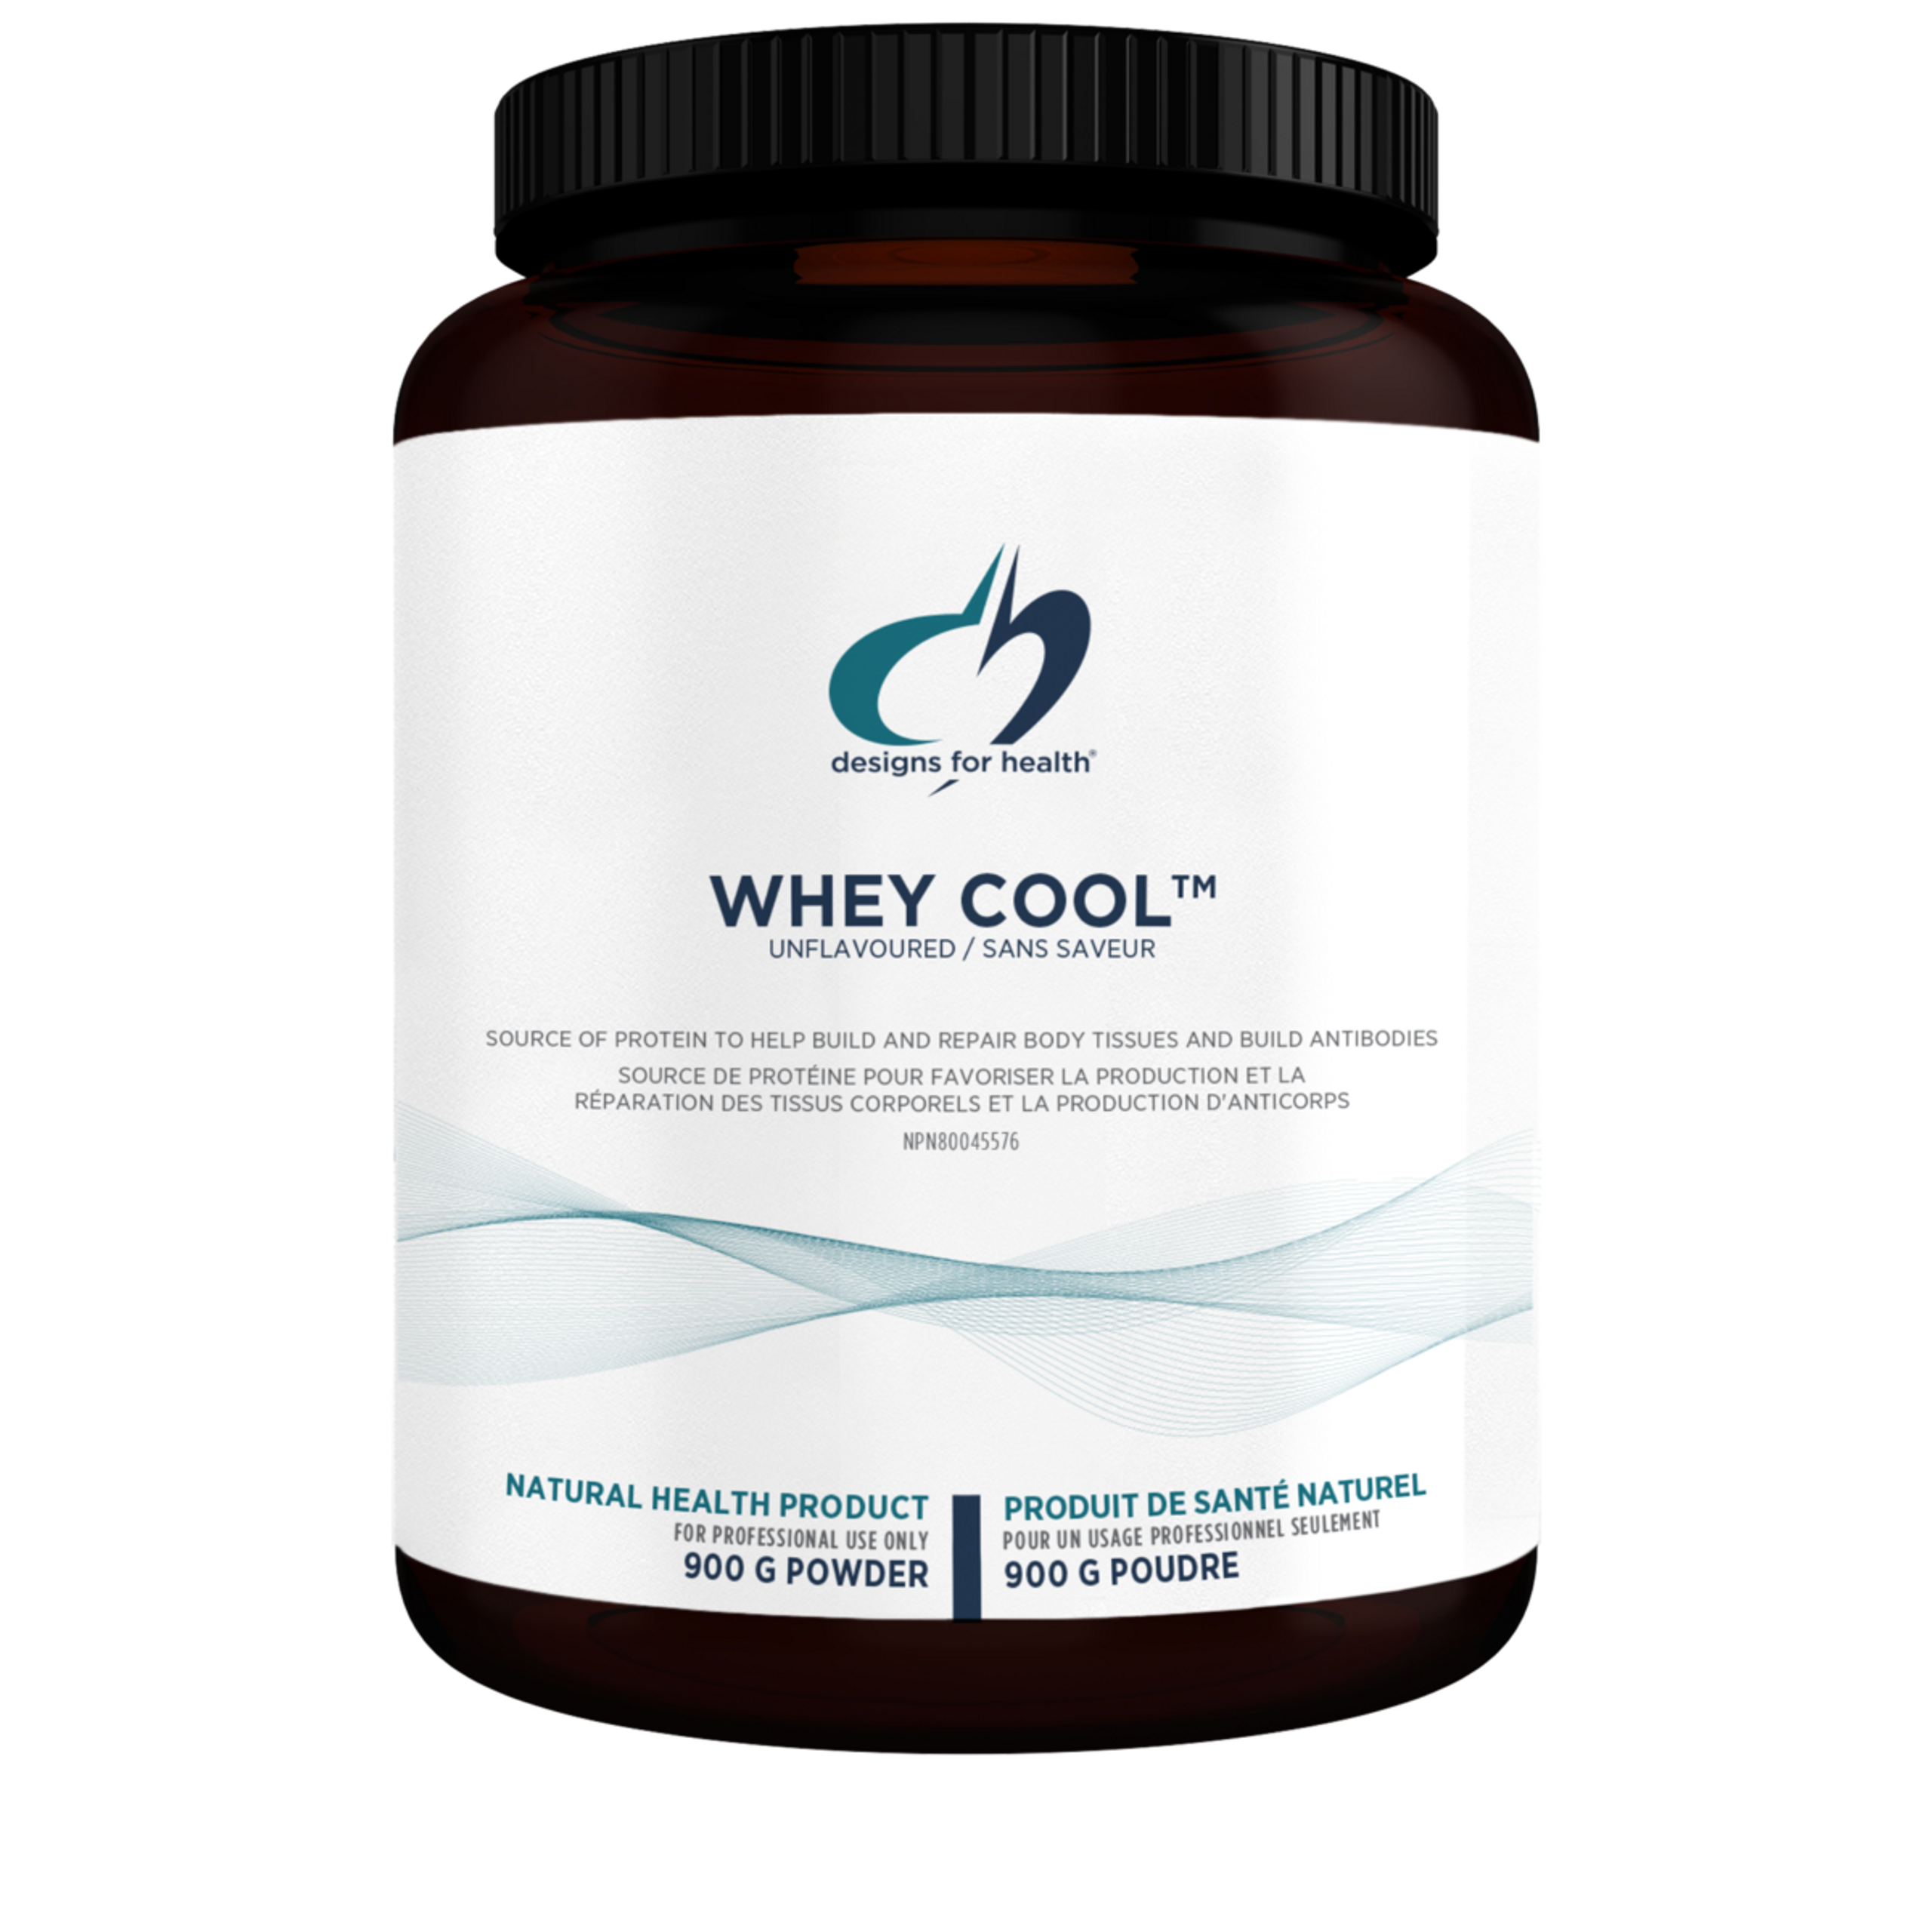 Designs For Health Whey Cool Unflavoured 900 G  43250.1602786279 ?c=2